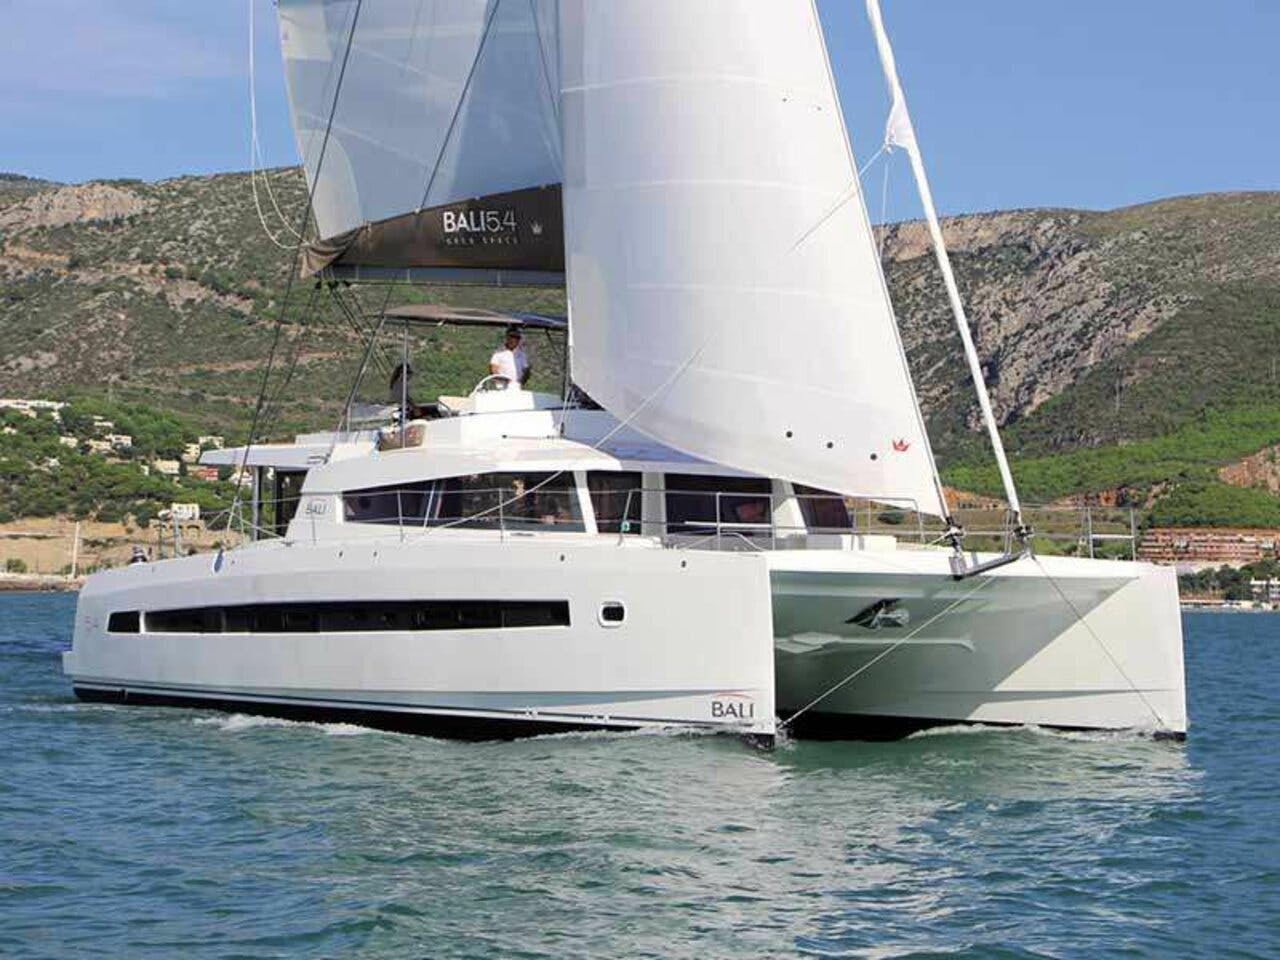 Book Bali 5.4 - 5 + 2 cab Catamaran for bareboat charter in Capo D'orlando Marina, Sicily, Italy with TripYacht!, picture 1